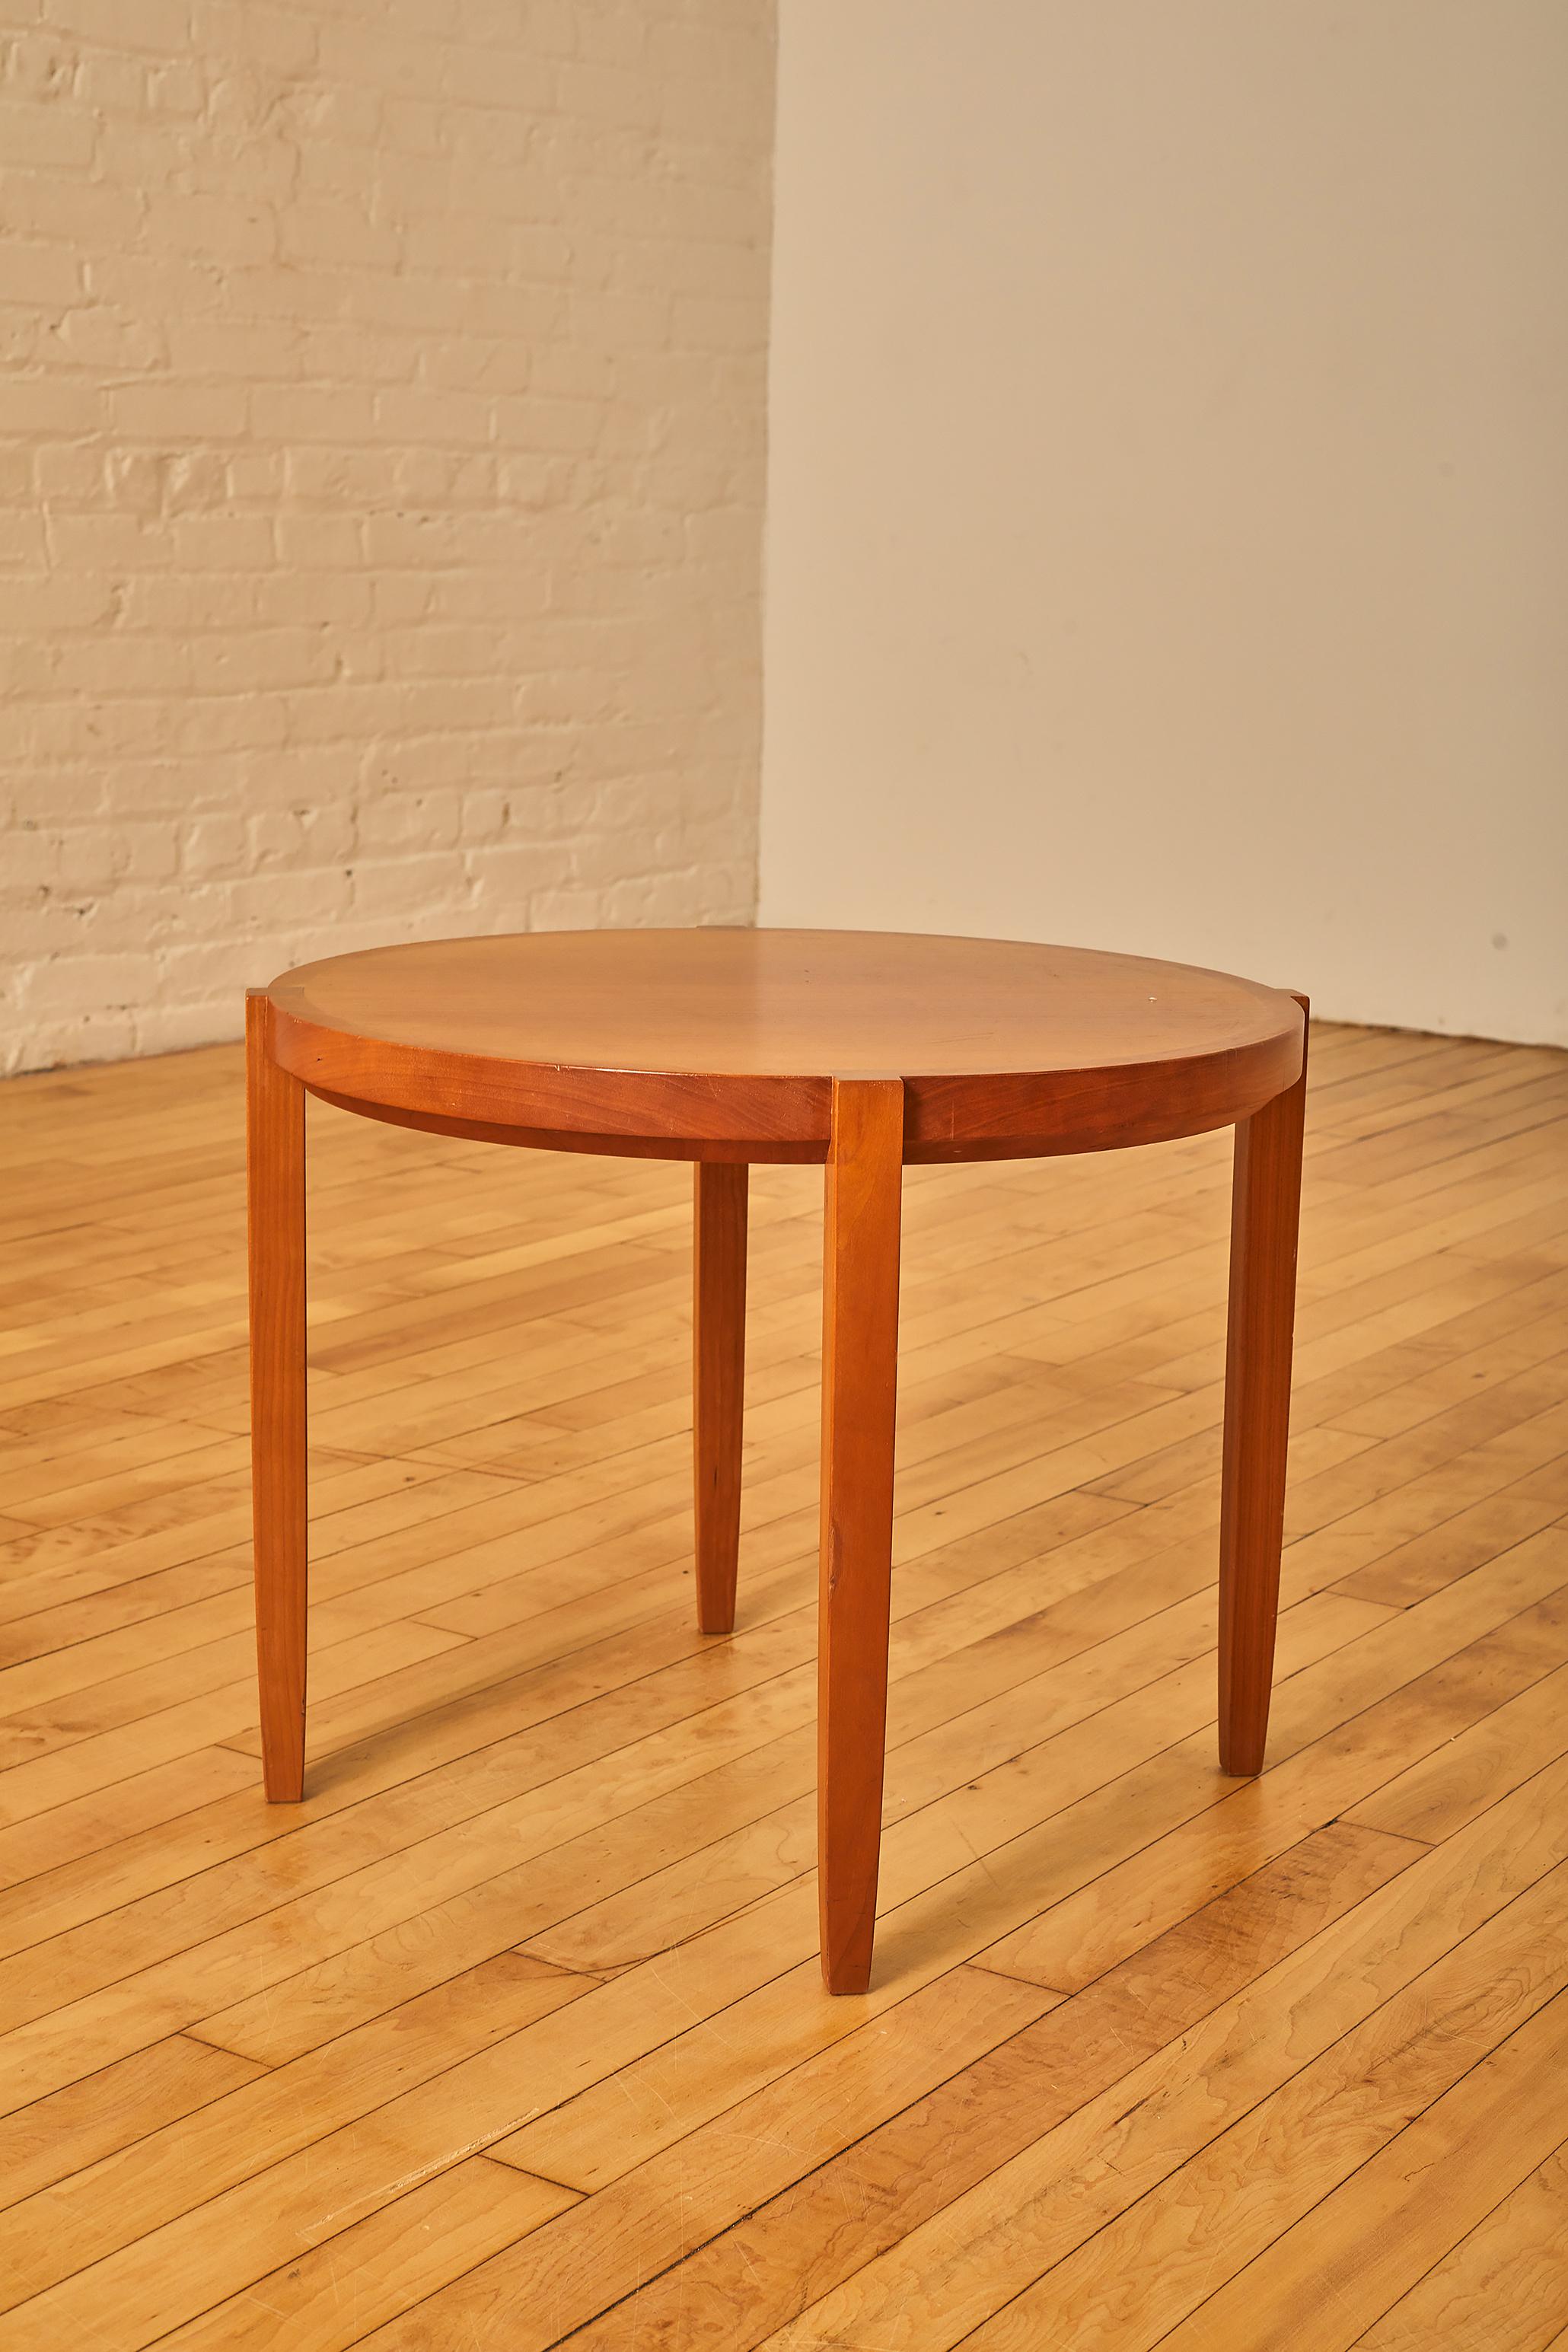 20th Century Mid-Century Modern Round Side Table For Sale